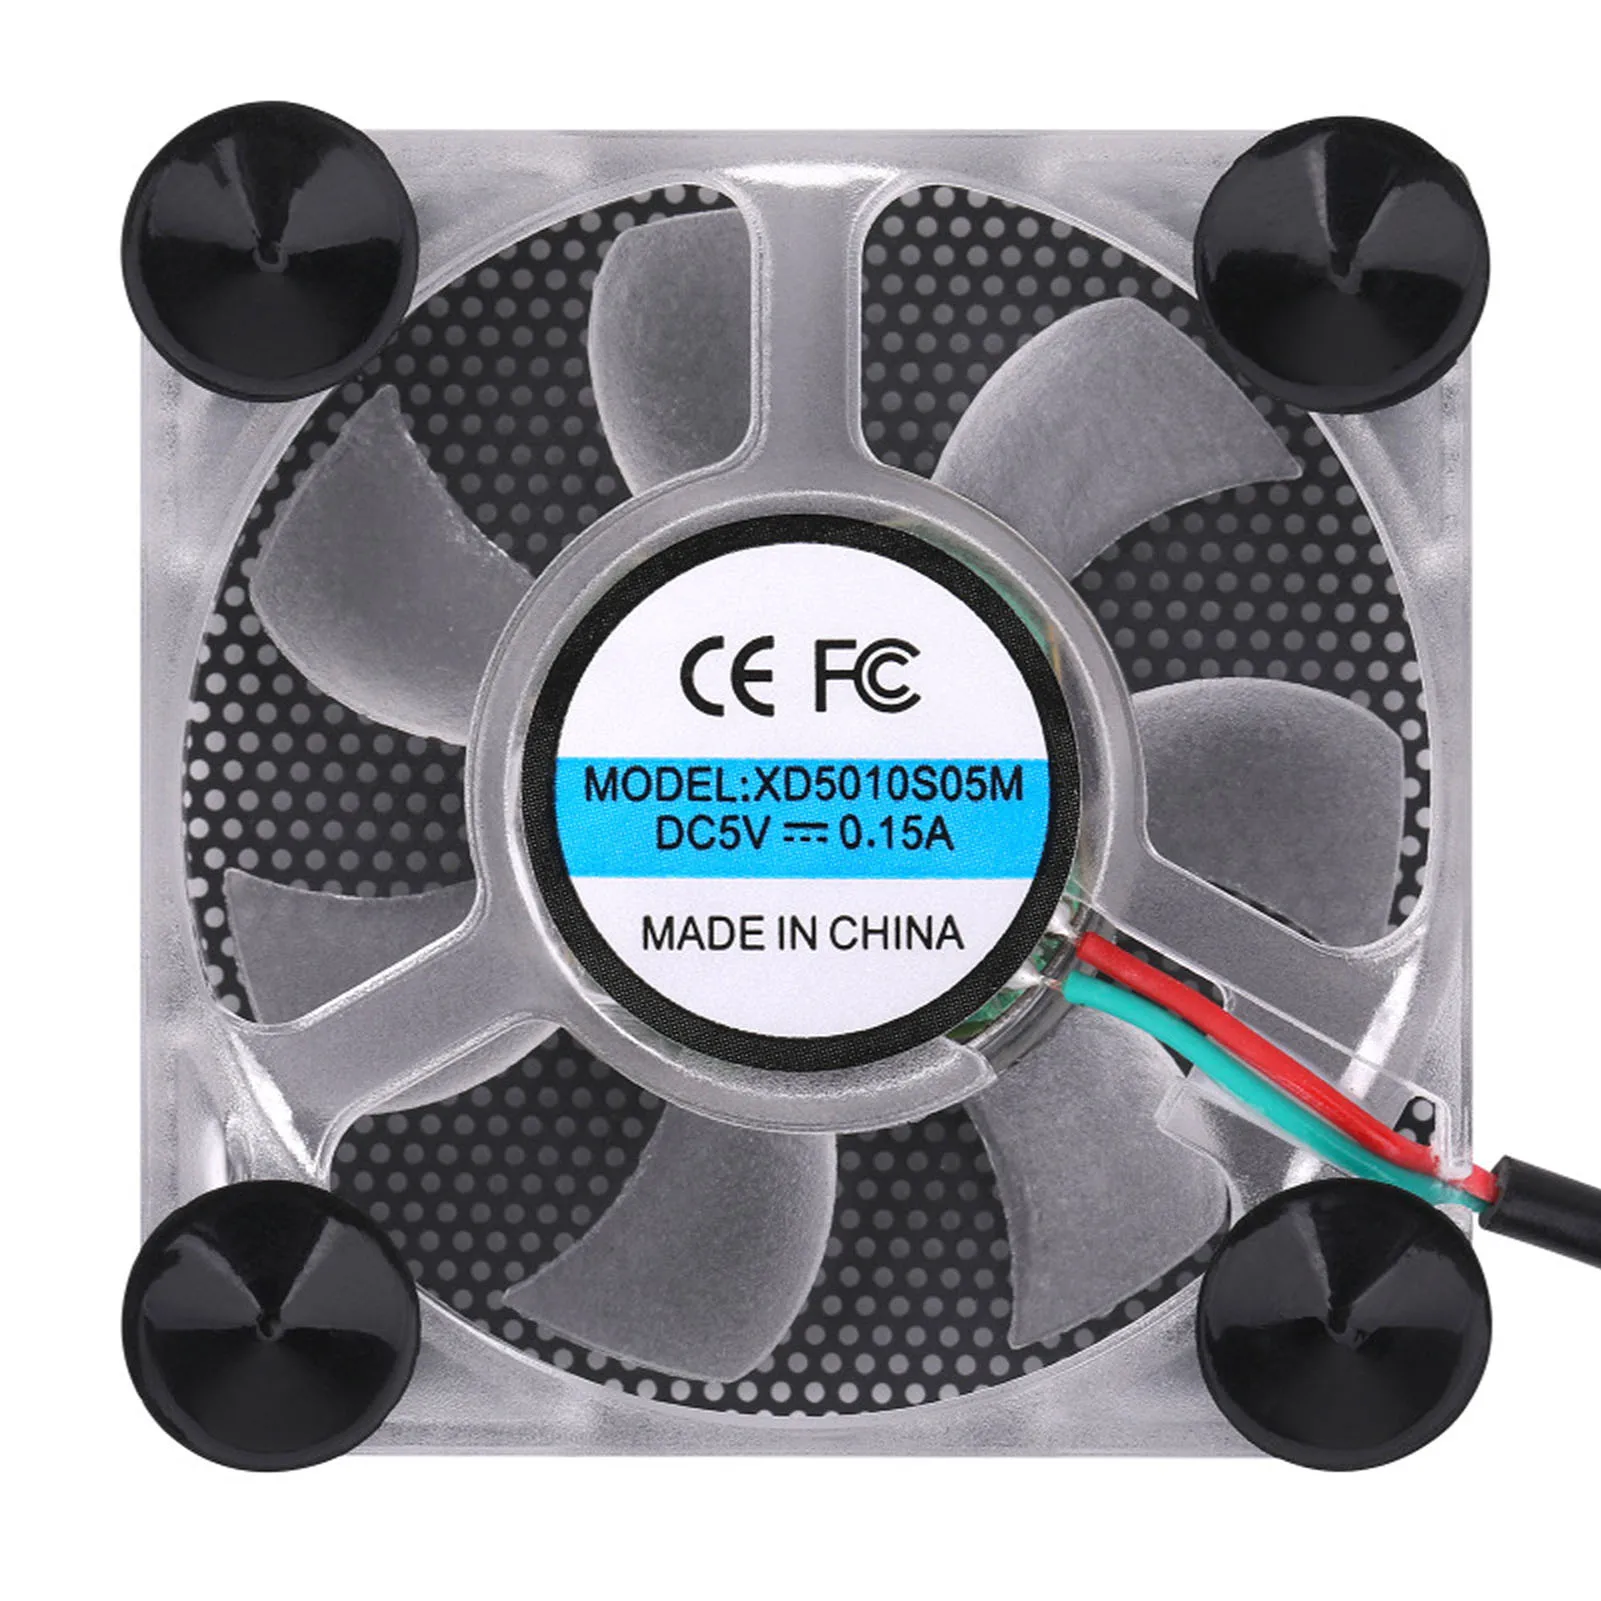 

Mini Mobile Phone Radiator Cooling Fan For Video Streaming VLOG Mobile Game Cellphone Radiator With Sucker Mini Phone Heat Sink